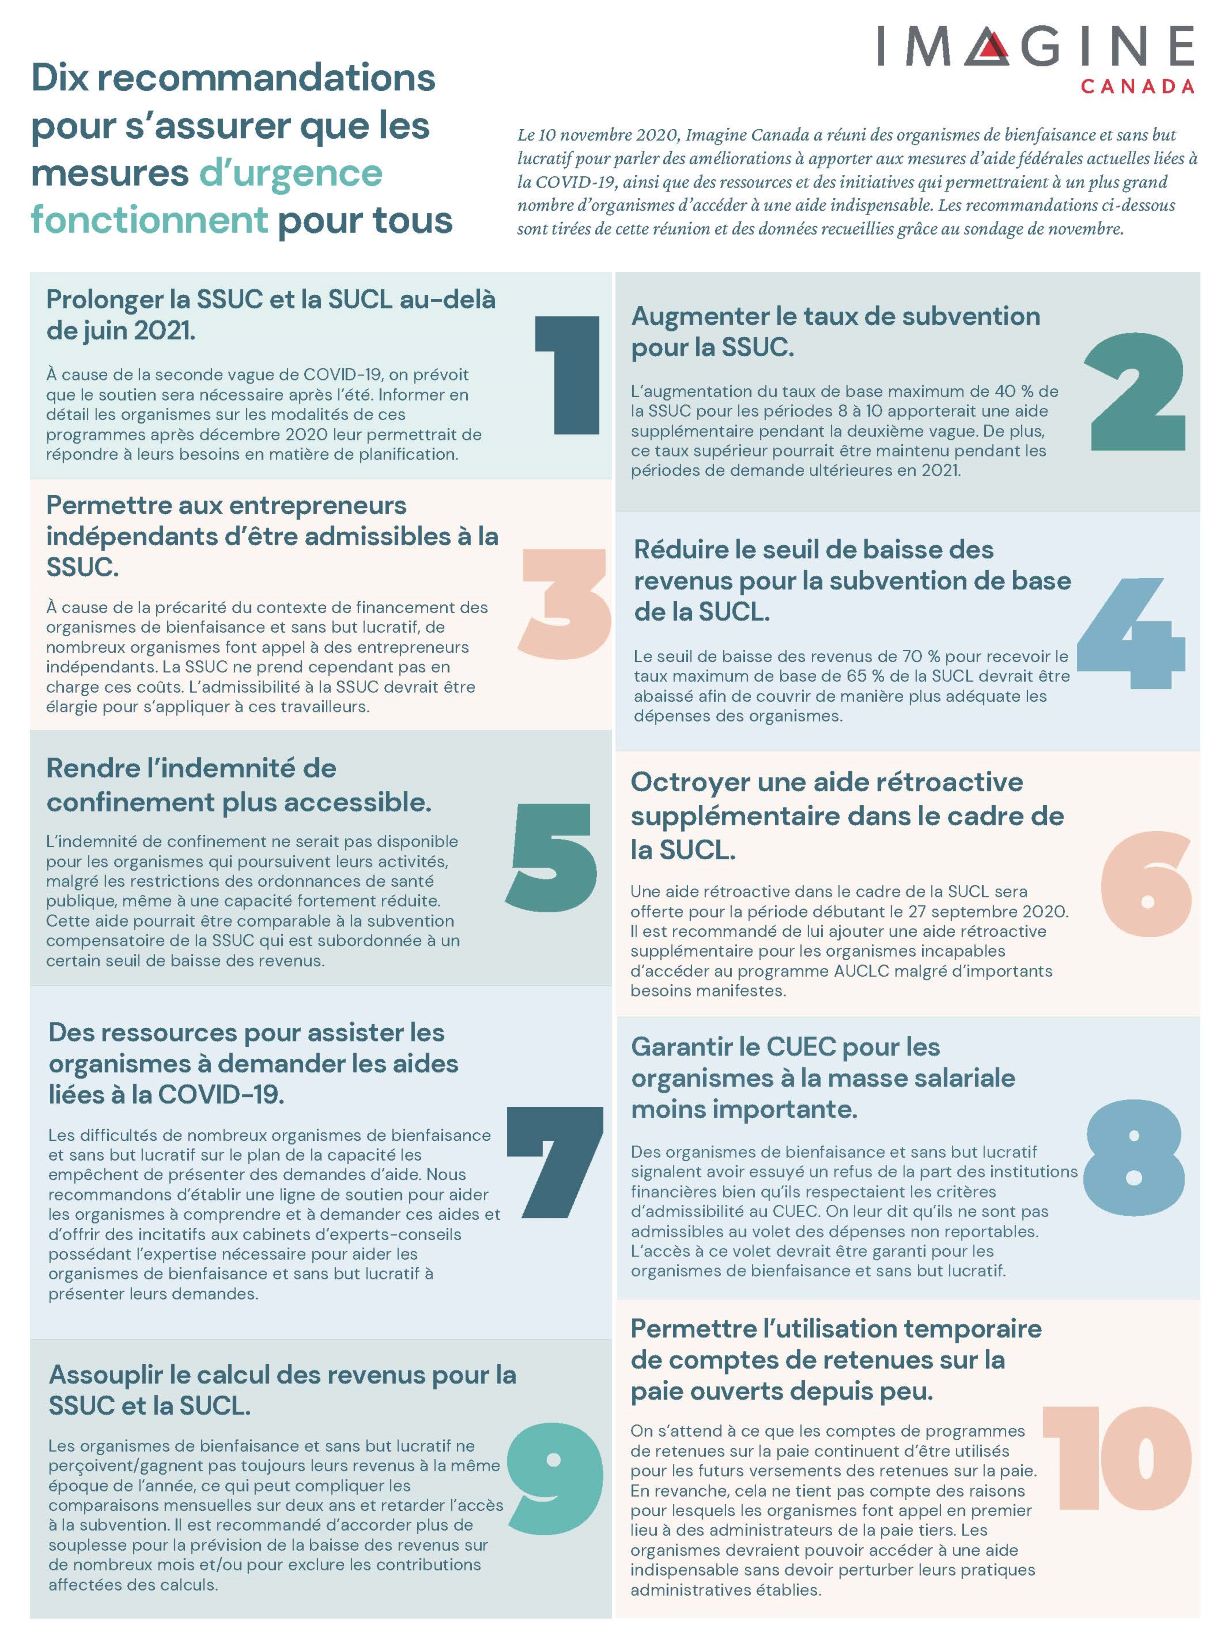 10 actions to ensure emergency measures work for all chart French